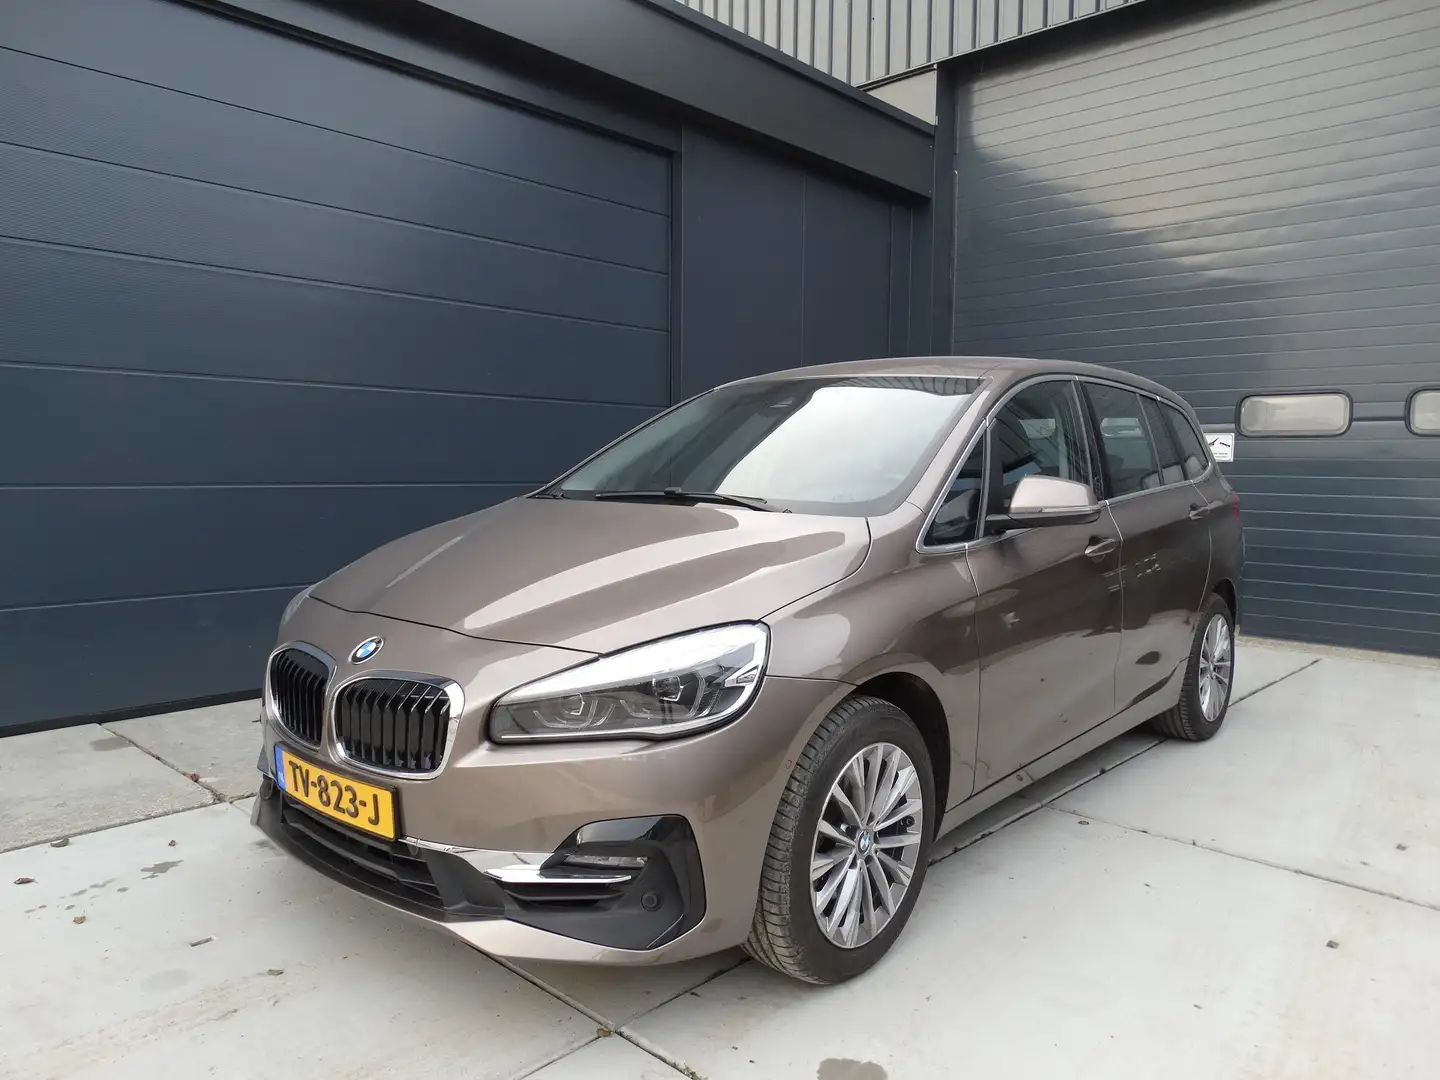 BMW 216 216i Gran Tourer 2018 109pk corporate lease exe Beżowy - 1